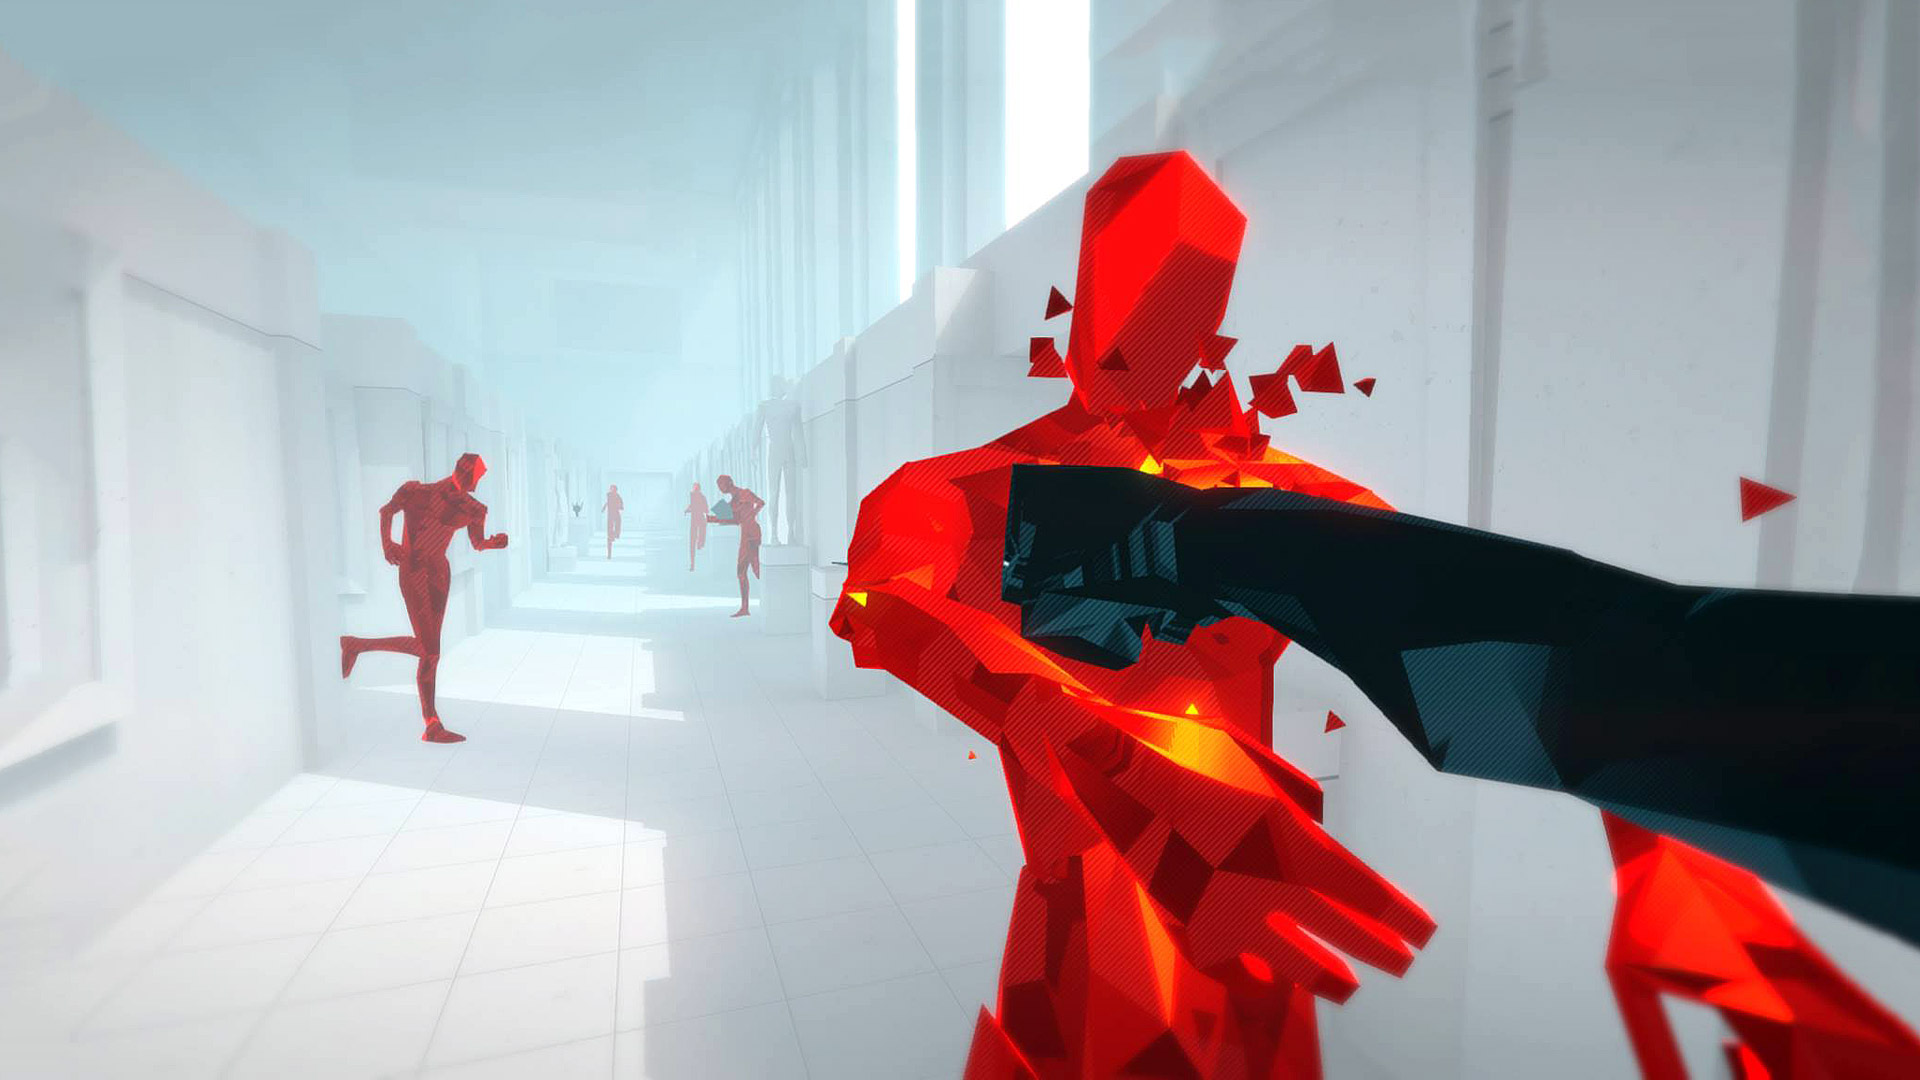 superhot vr without move controllers